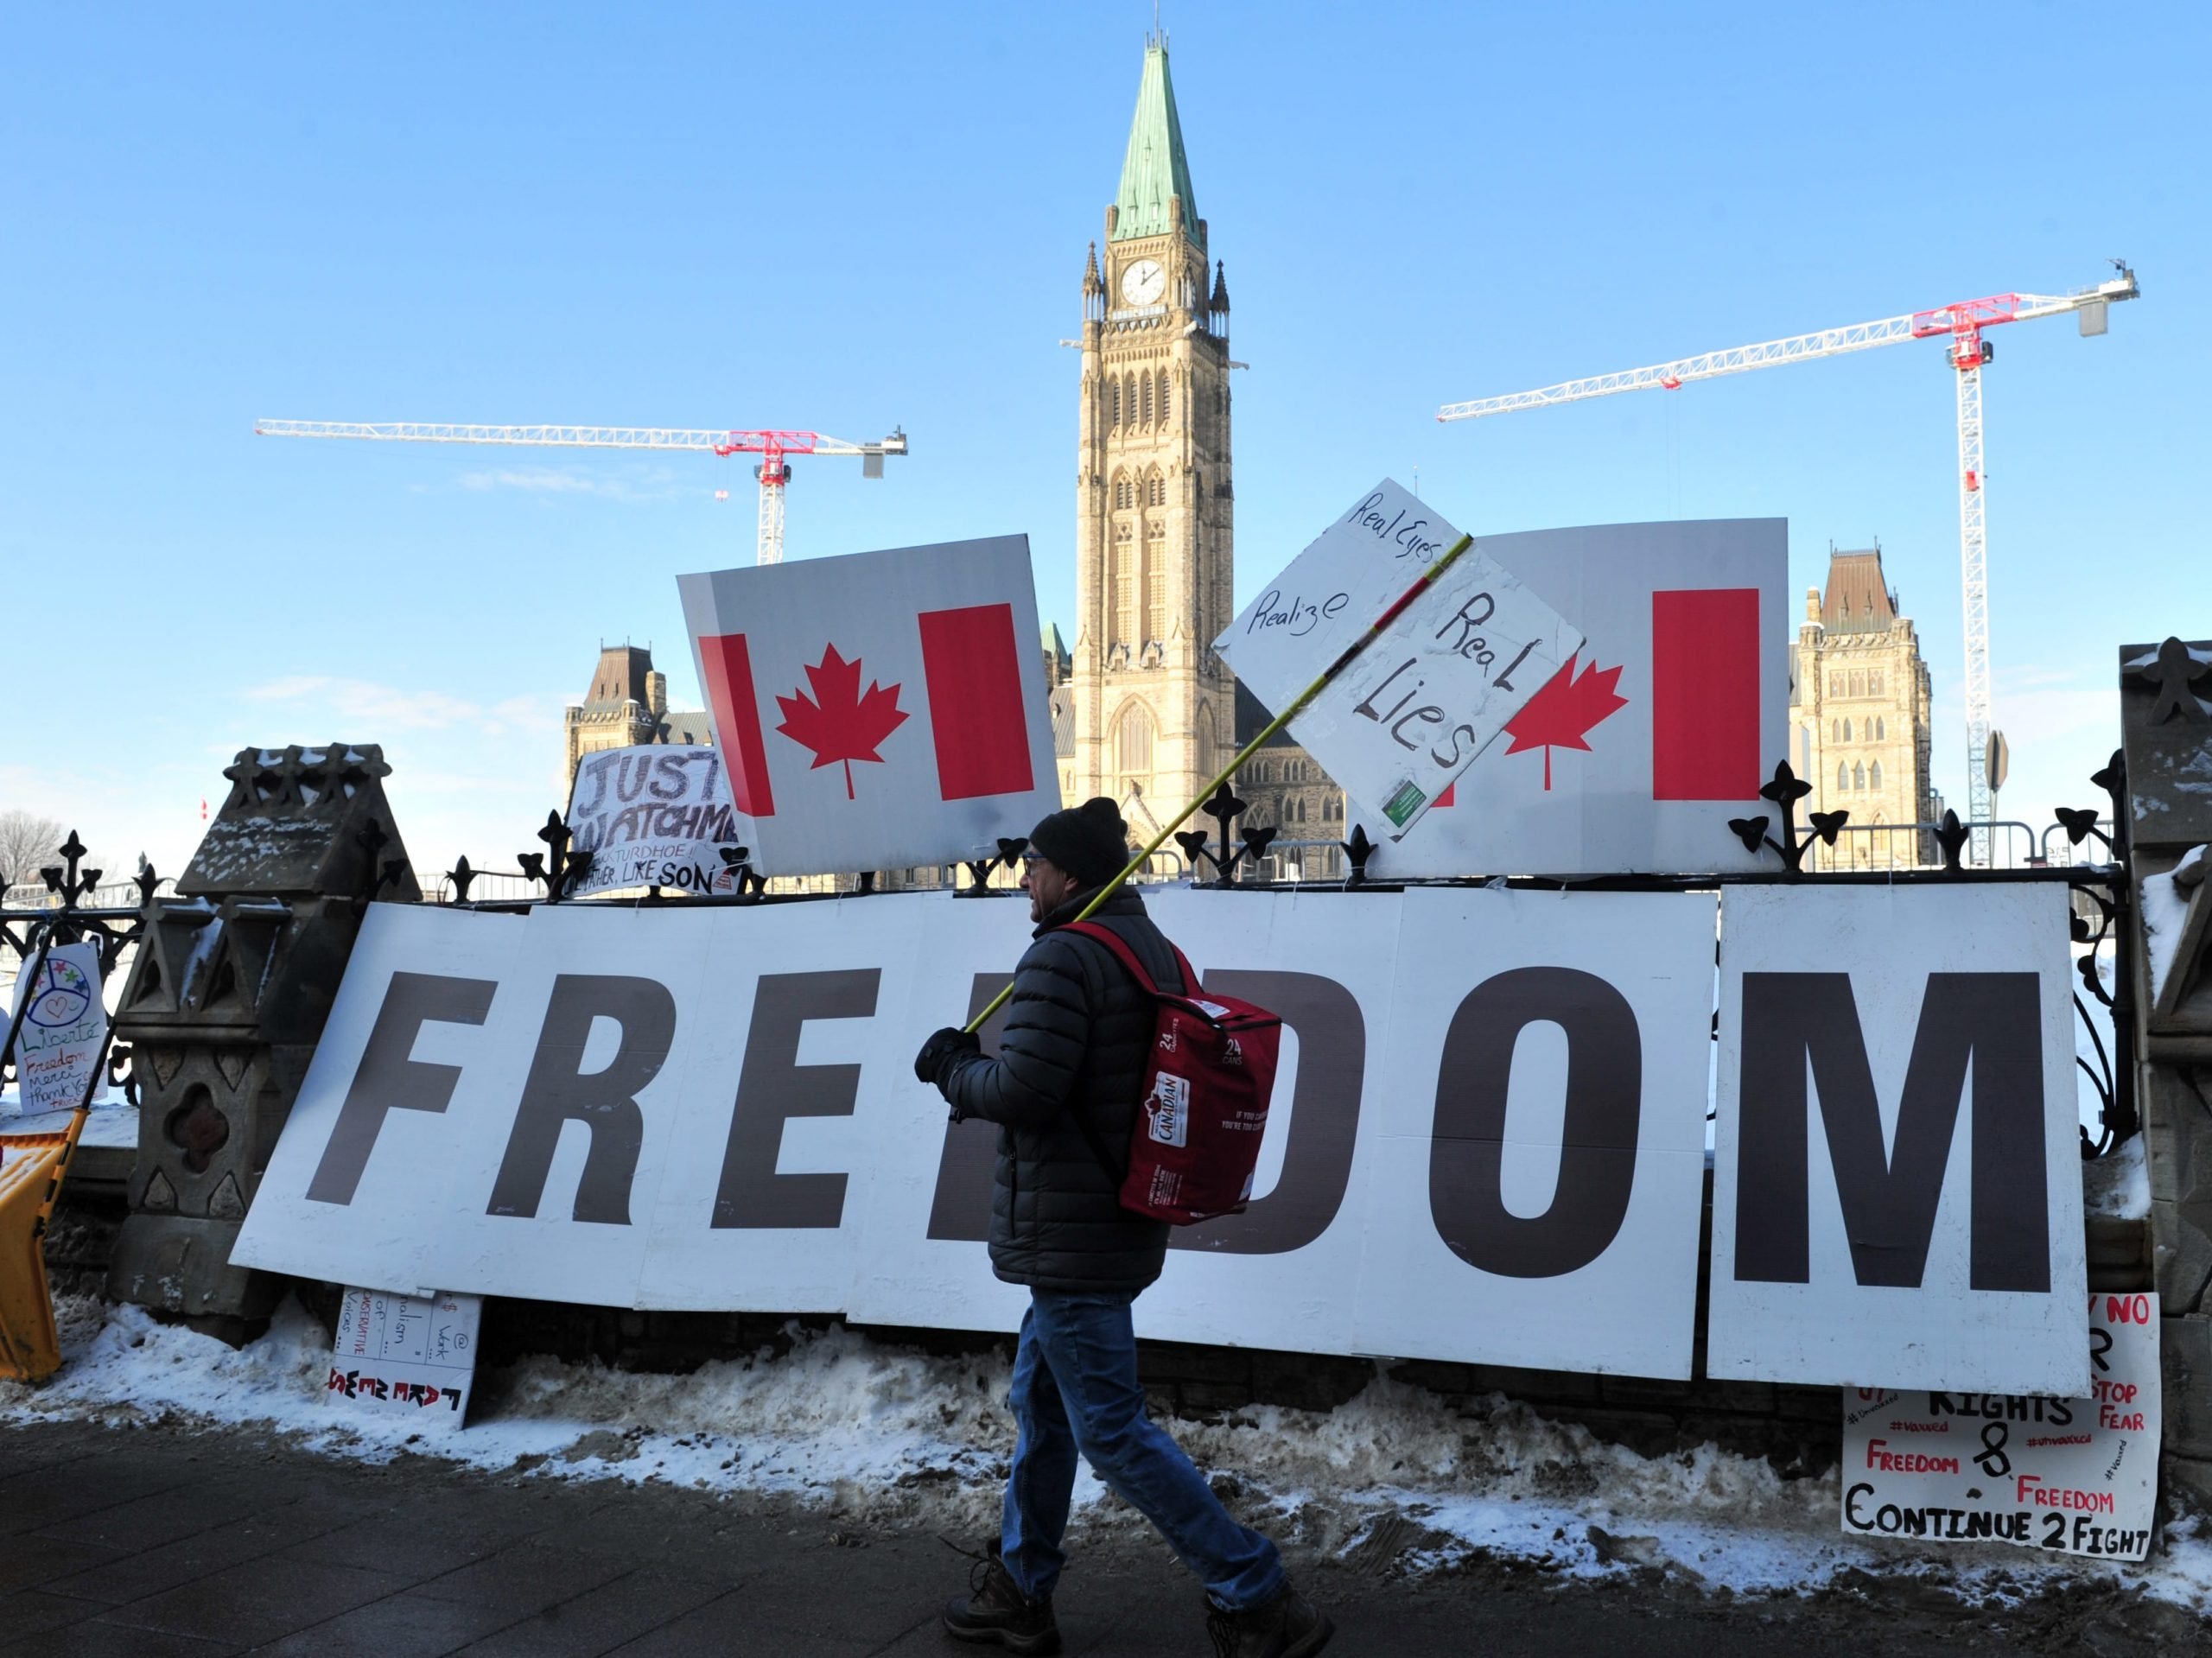 Protesters of the Freedom convoy gather near the parliament hill as truckers continue to protest in Ottawa, Canada on February 7, 2022.